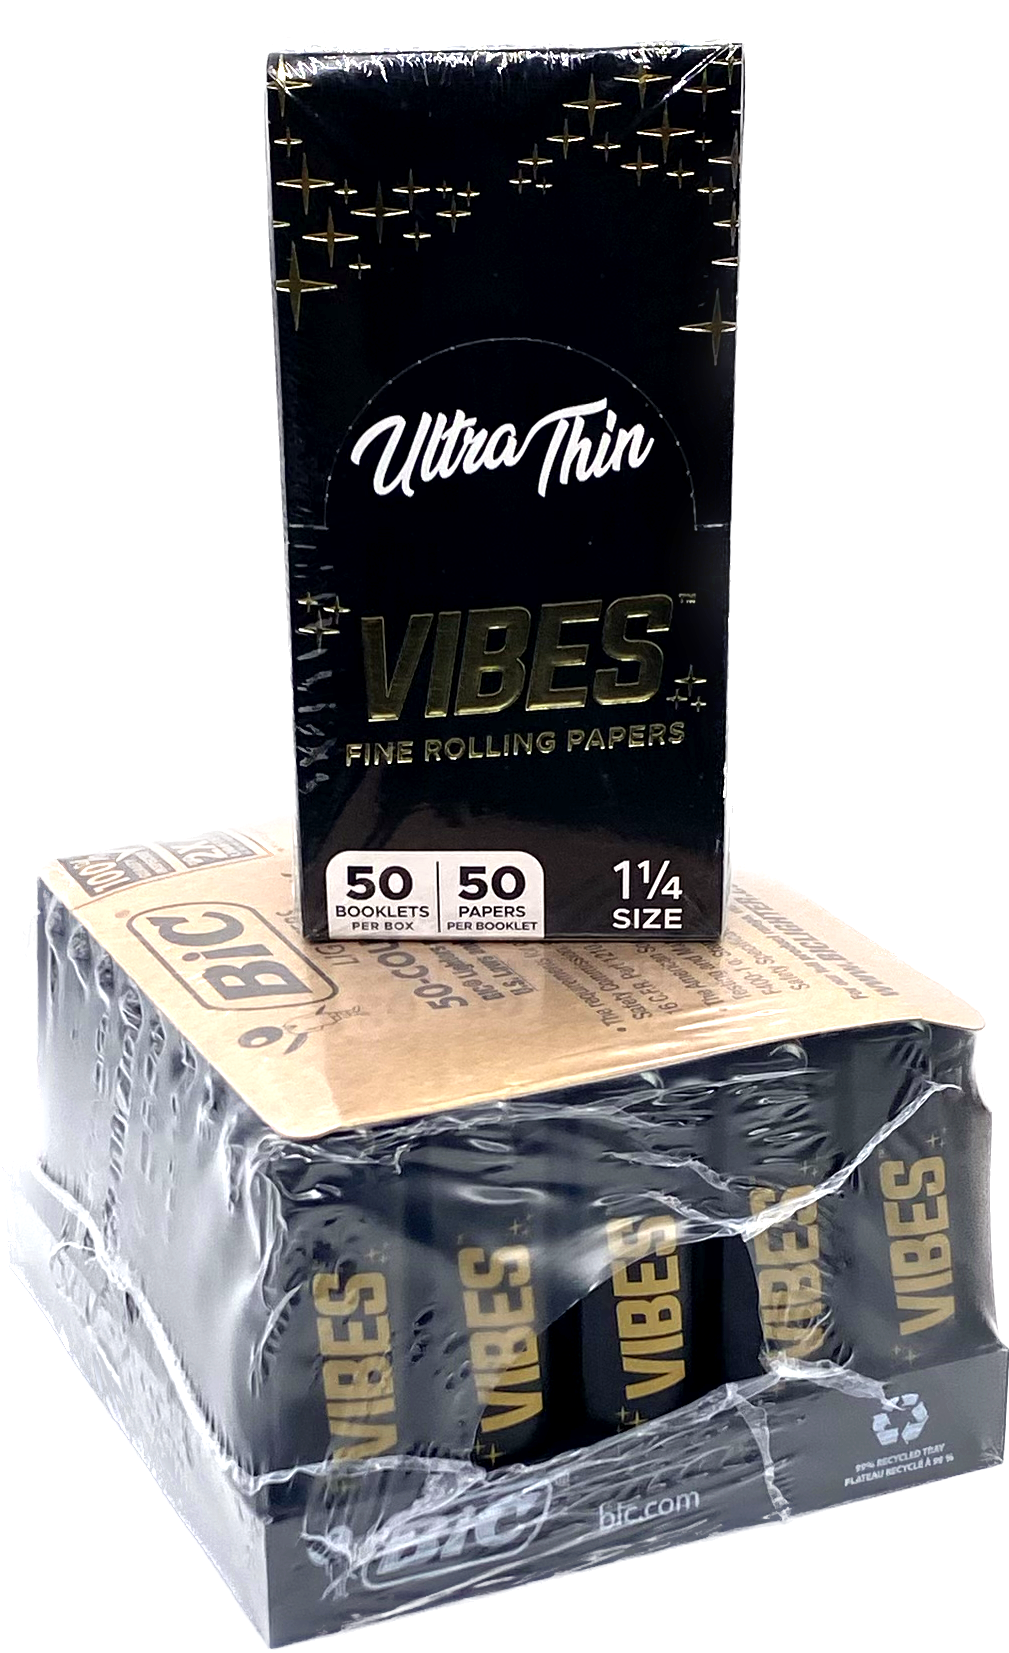 VIBES Blk on Blk Bic 50ct Lighters w/ Free VIBES Ultra Thin 1 1/4 Box 50 Leaves Per Booklet / 50 Booklets Per Box